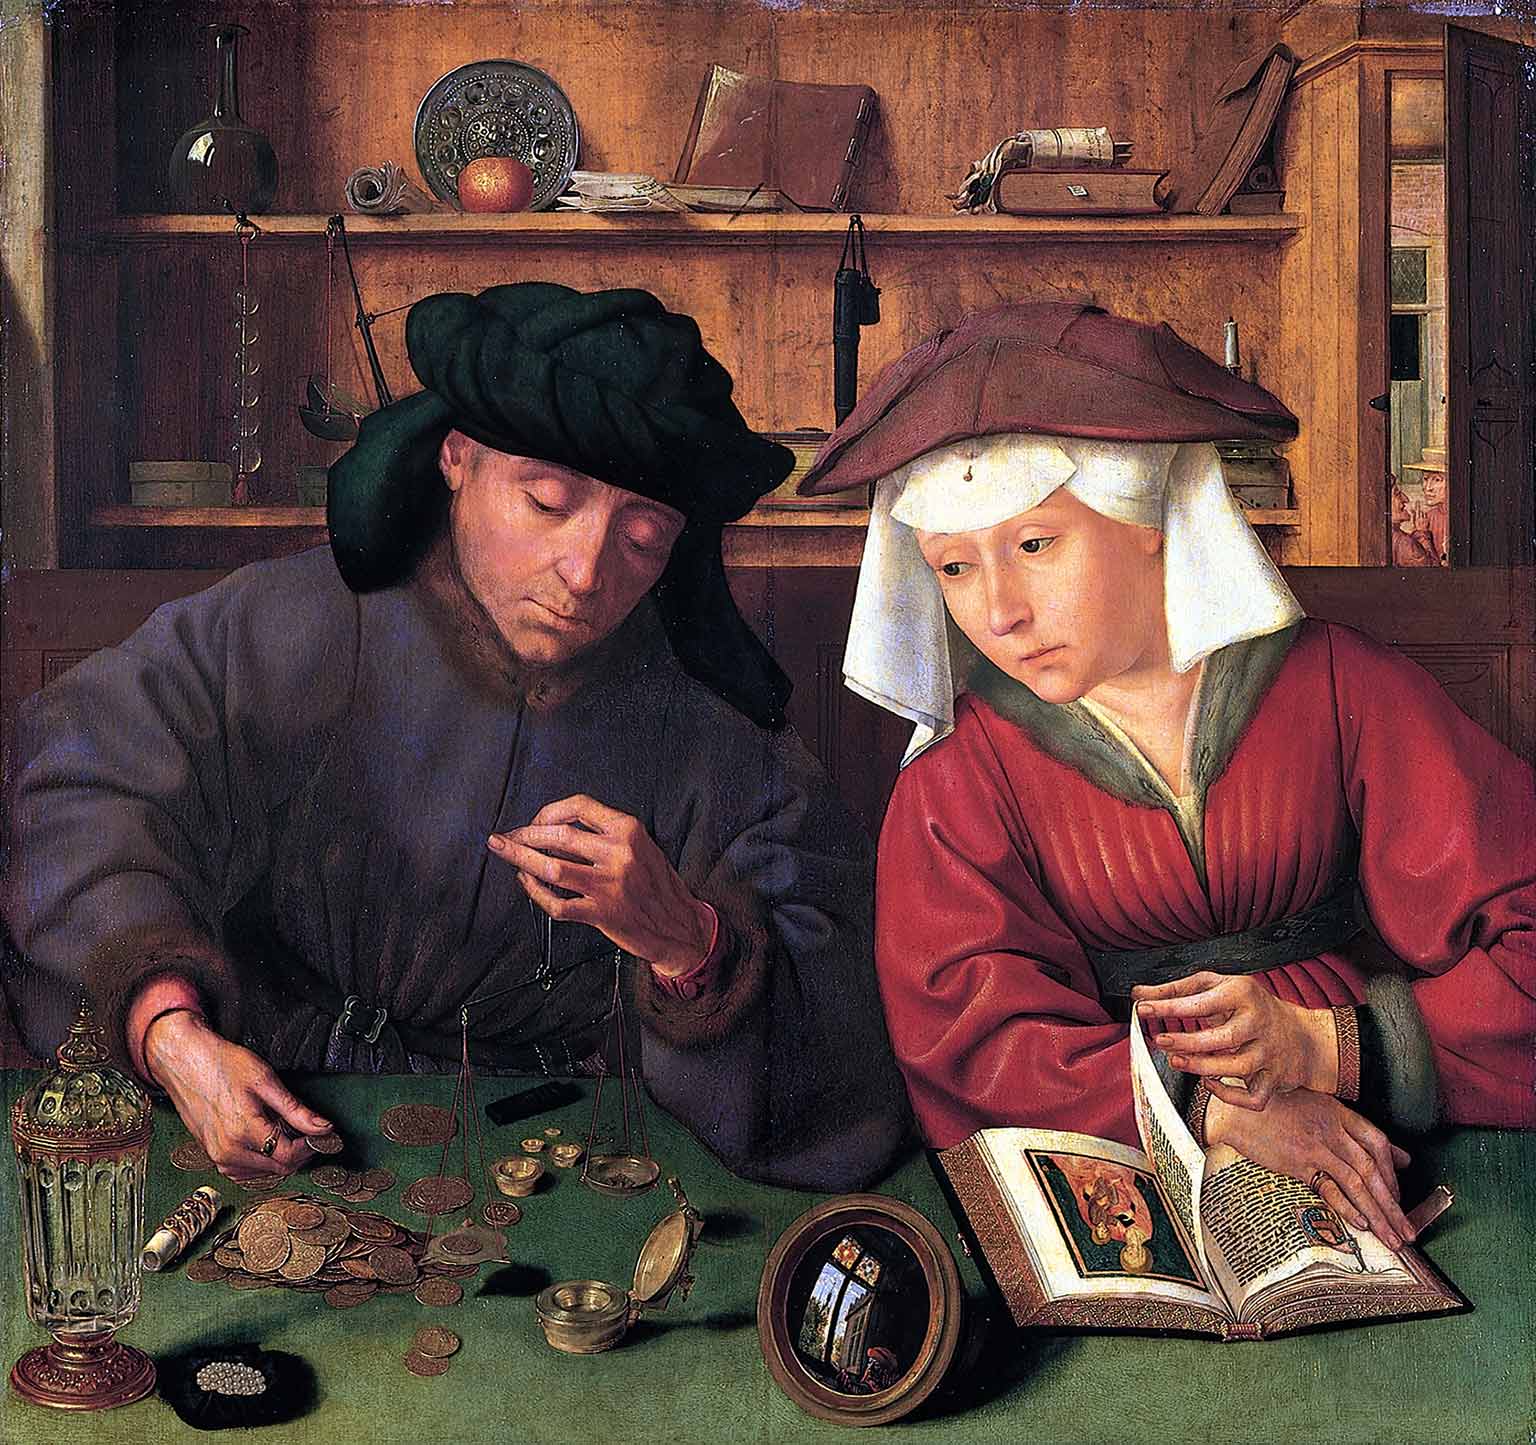 The Moneylender and his Wife, painting from 1514 by Quinten Massys in the Louvre, Paris